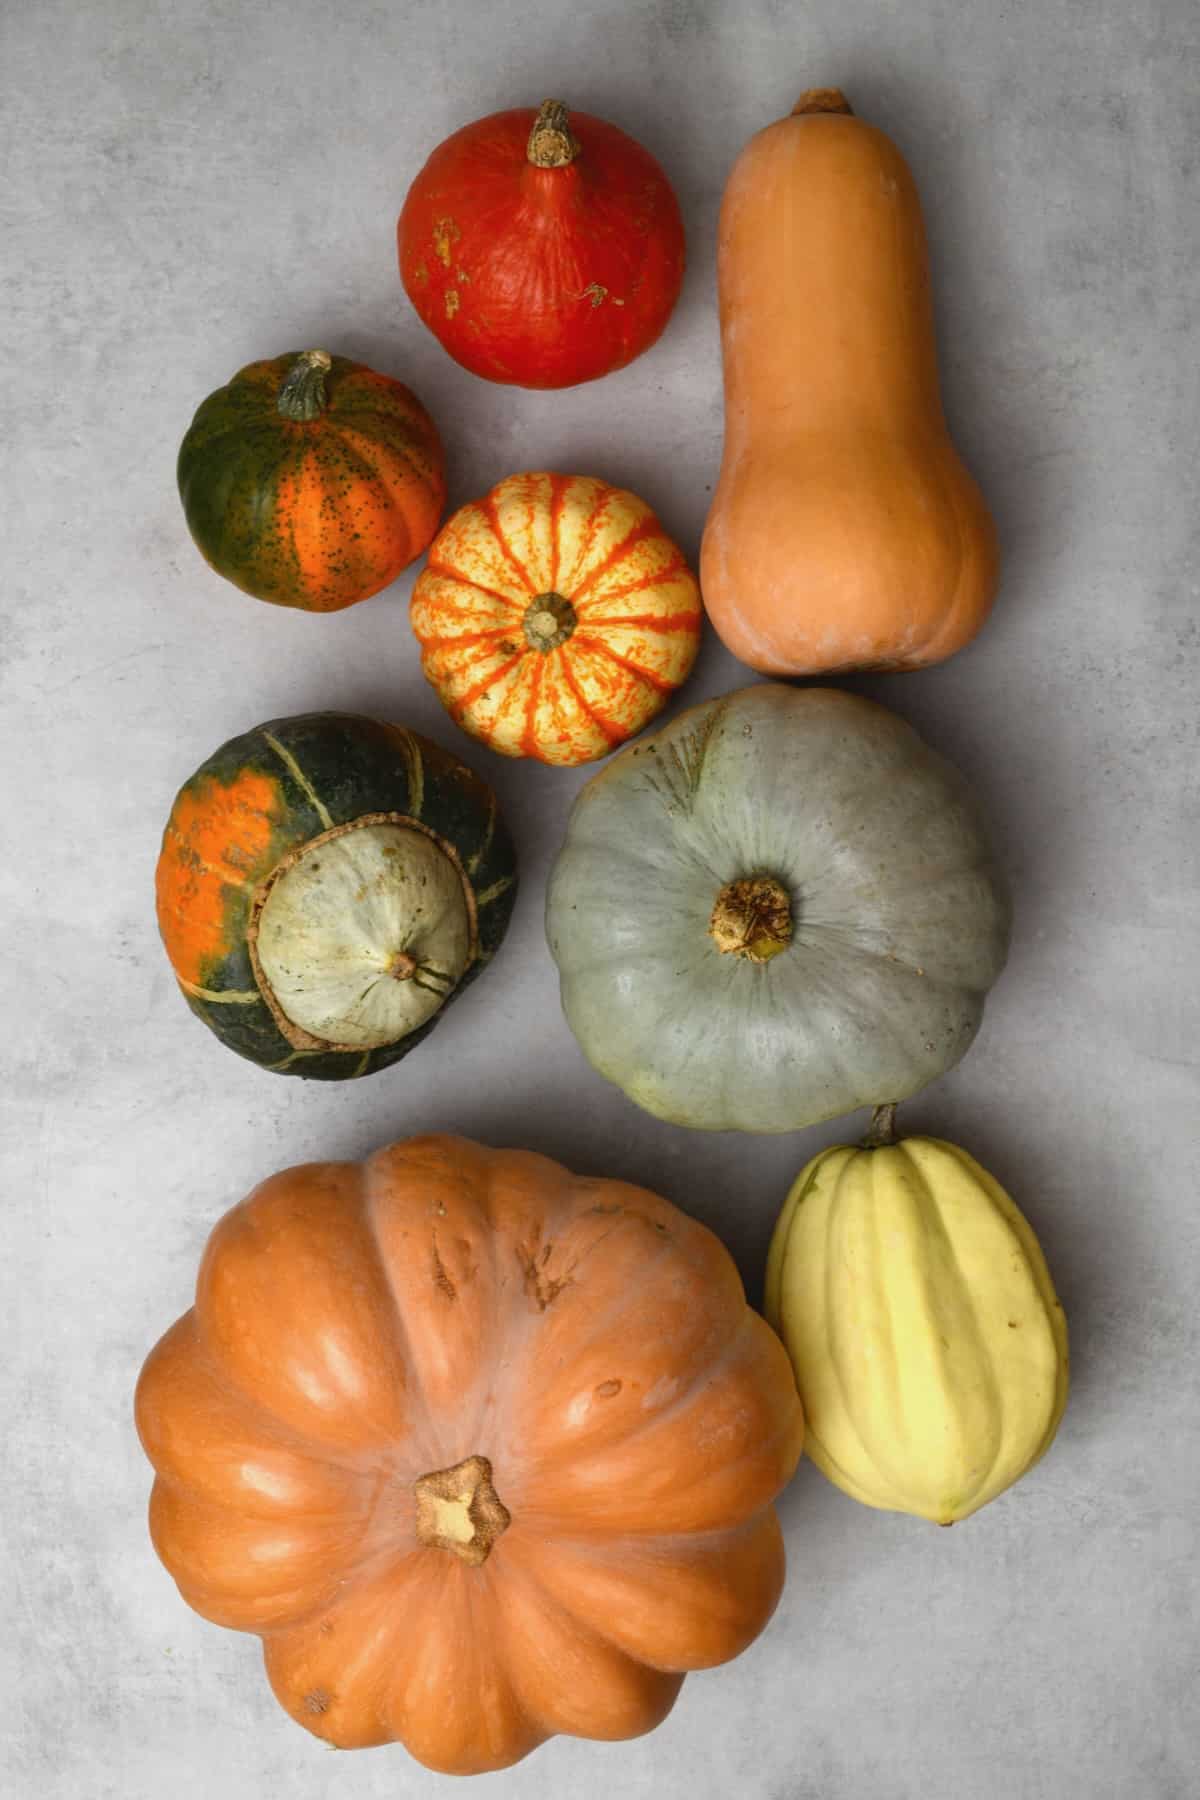 Different types of winter squash on a flat surface